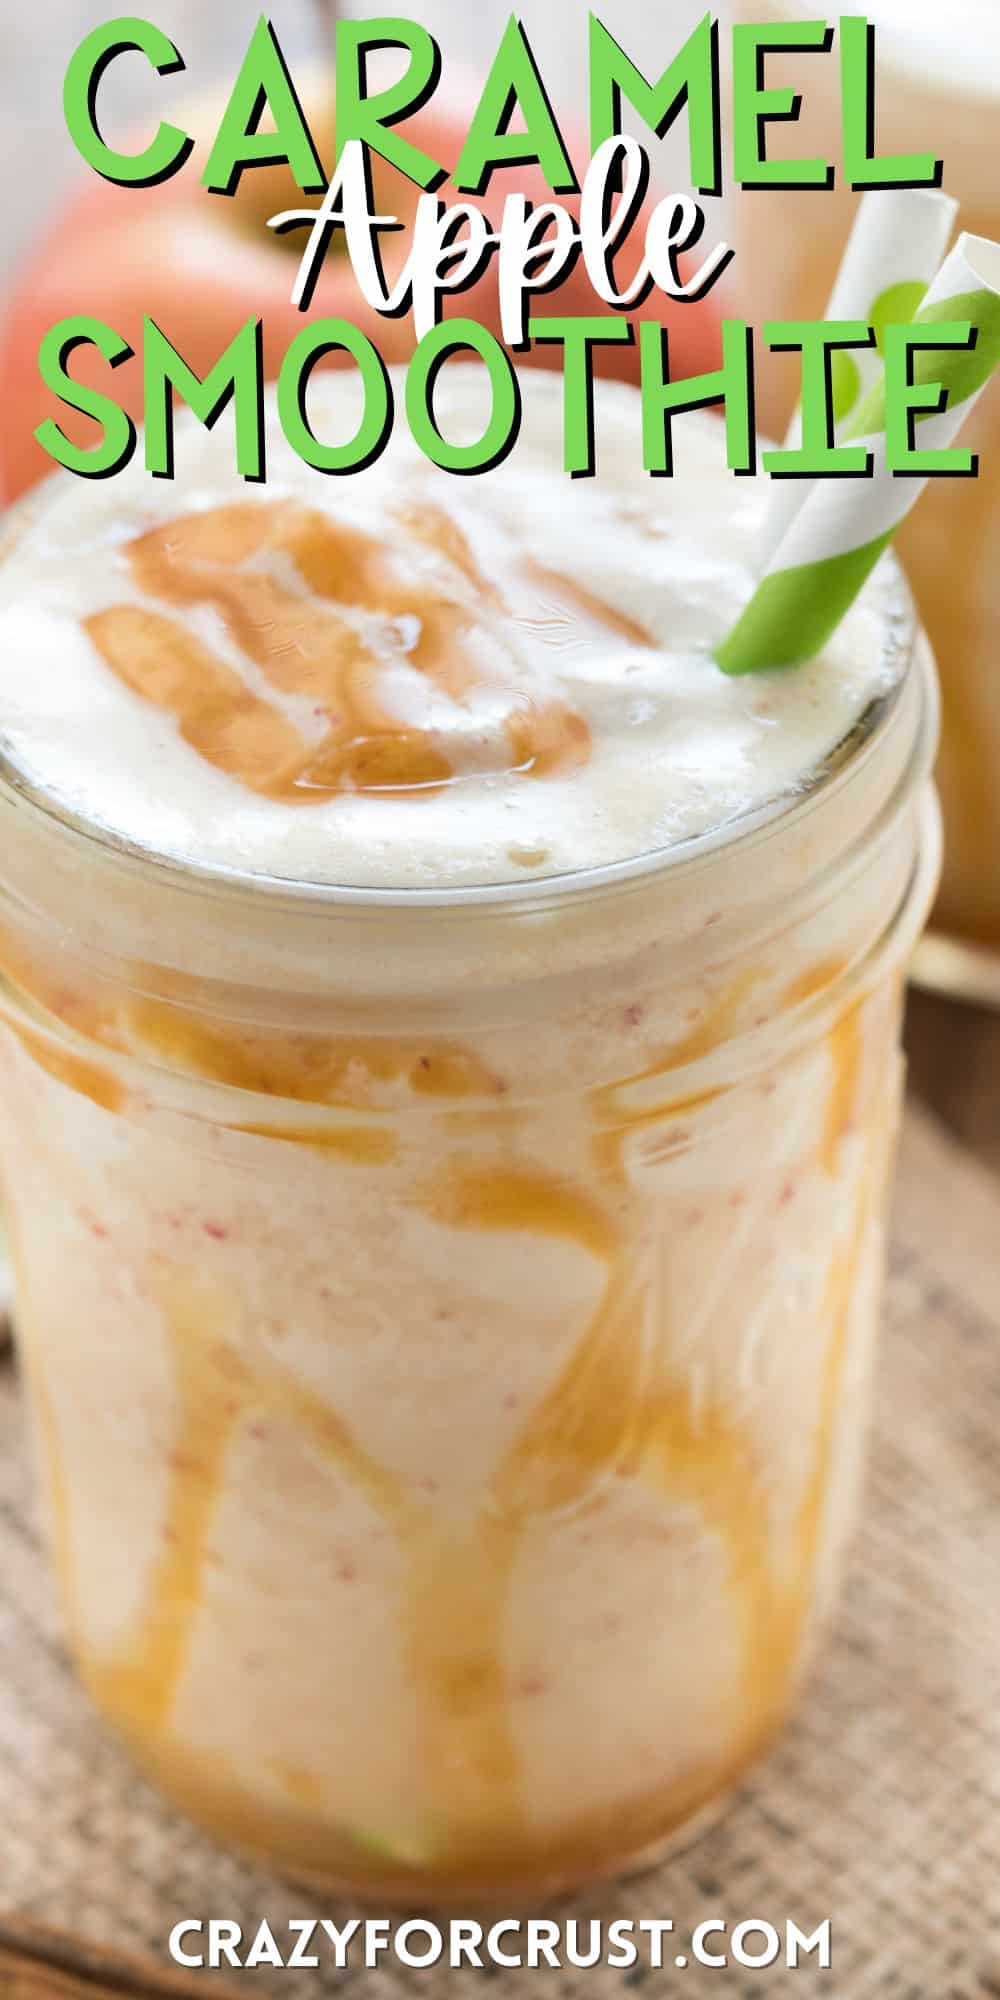 smoothie in a mason jar with caramel and two green straws in the drink with words on the image.